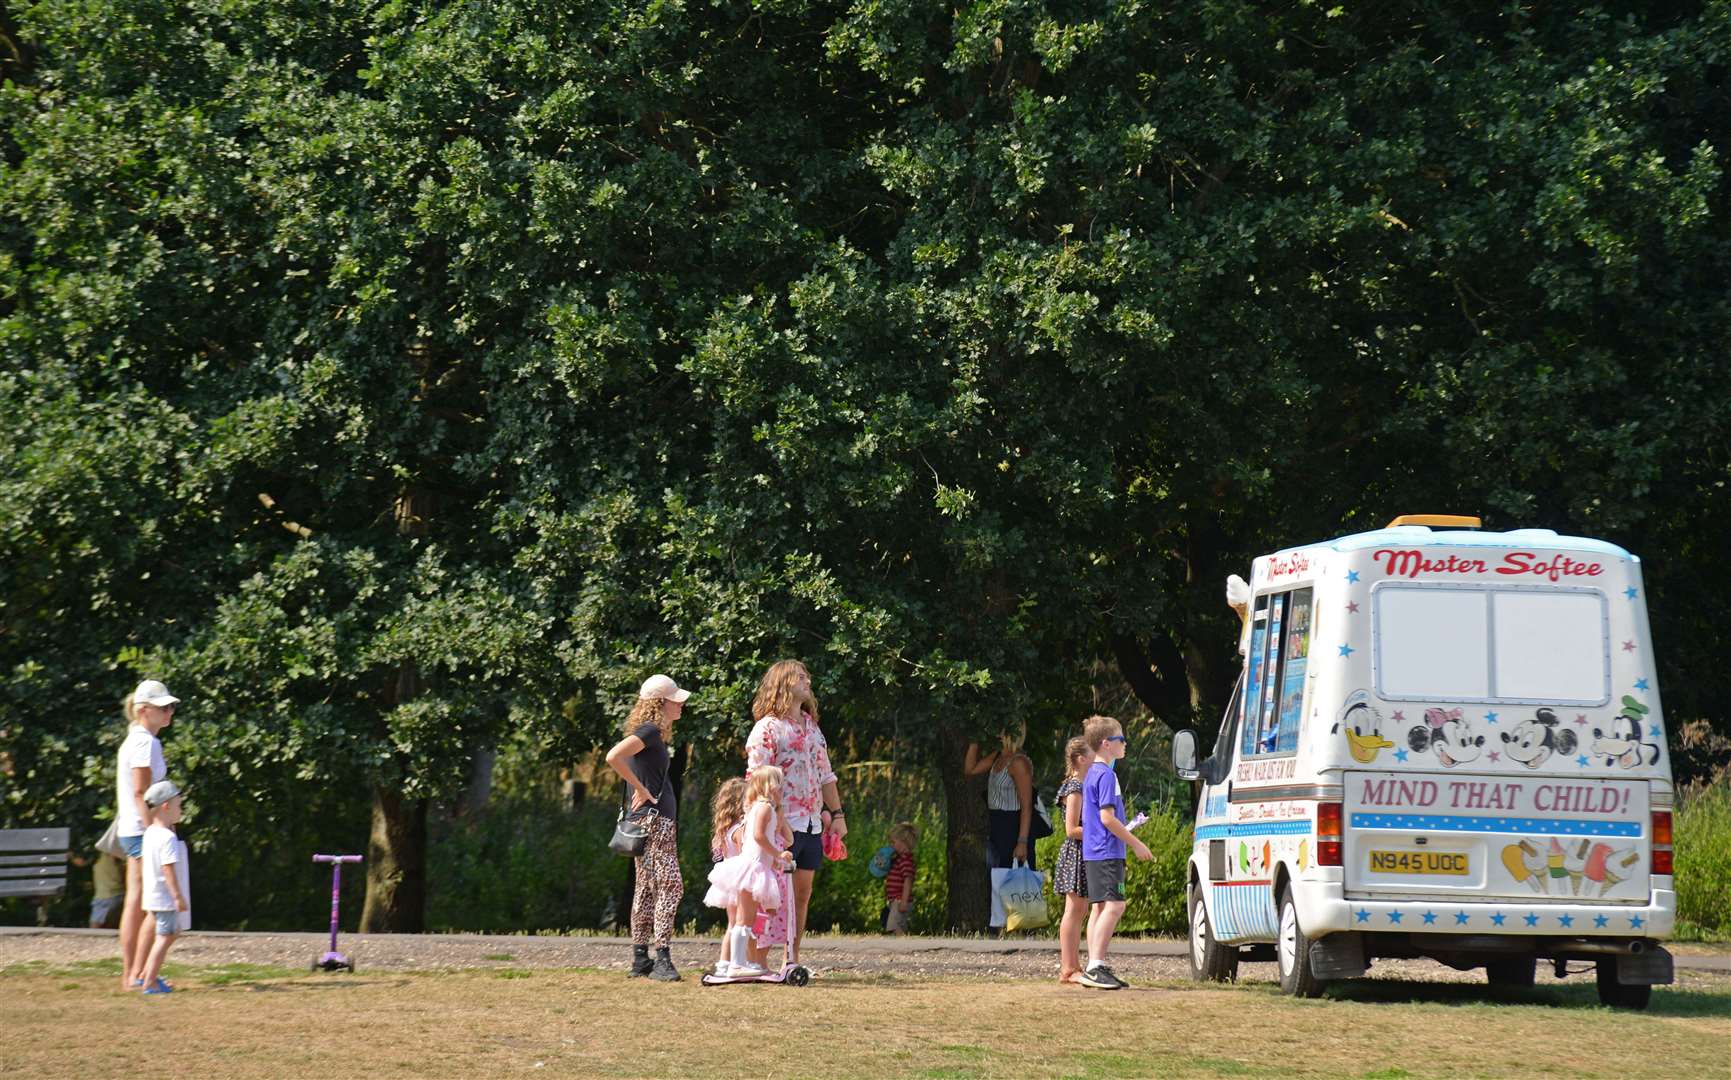 The summer season for ice cream vans is just getting under way